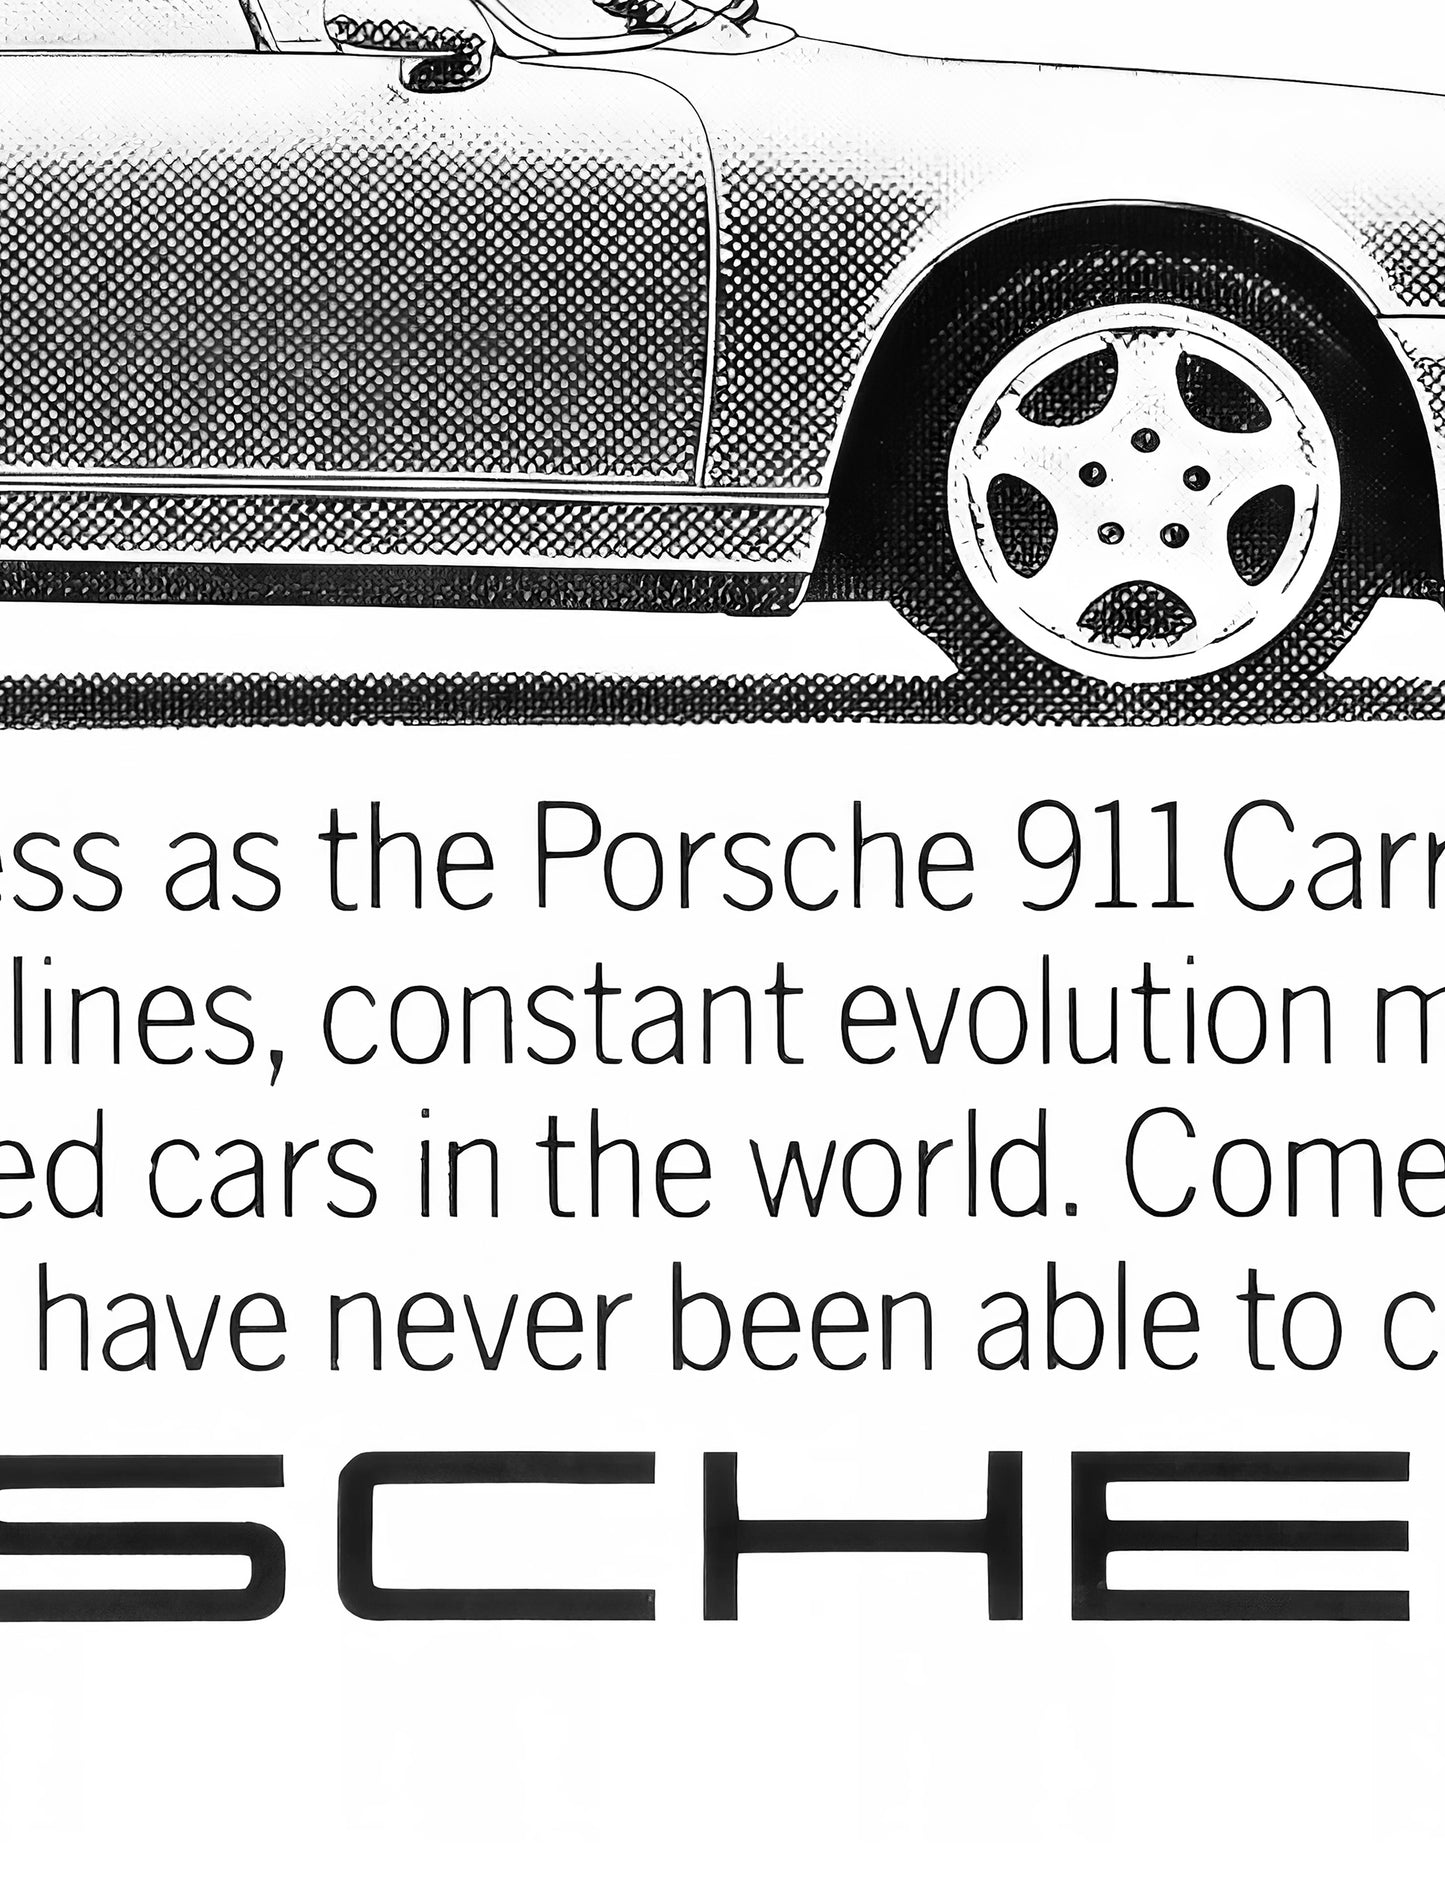 Porsche "It's Already Survived 10 Japanese Model Changes" Poster